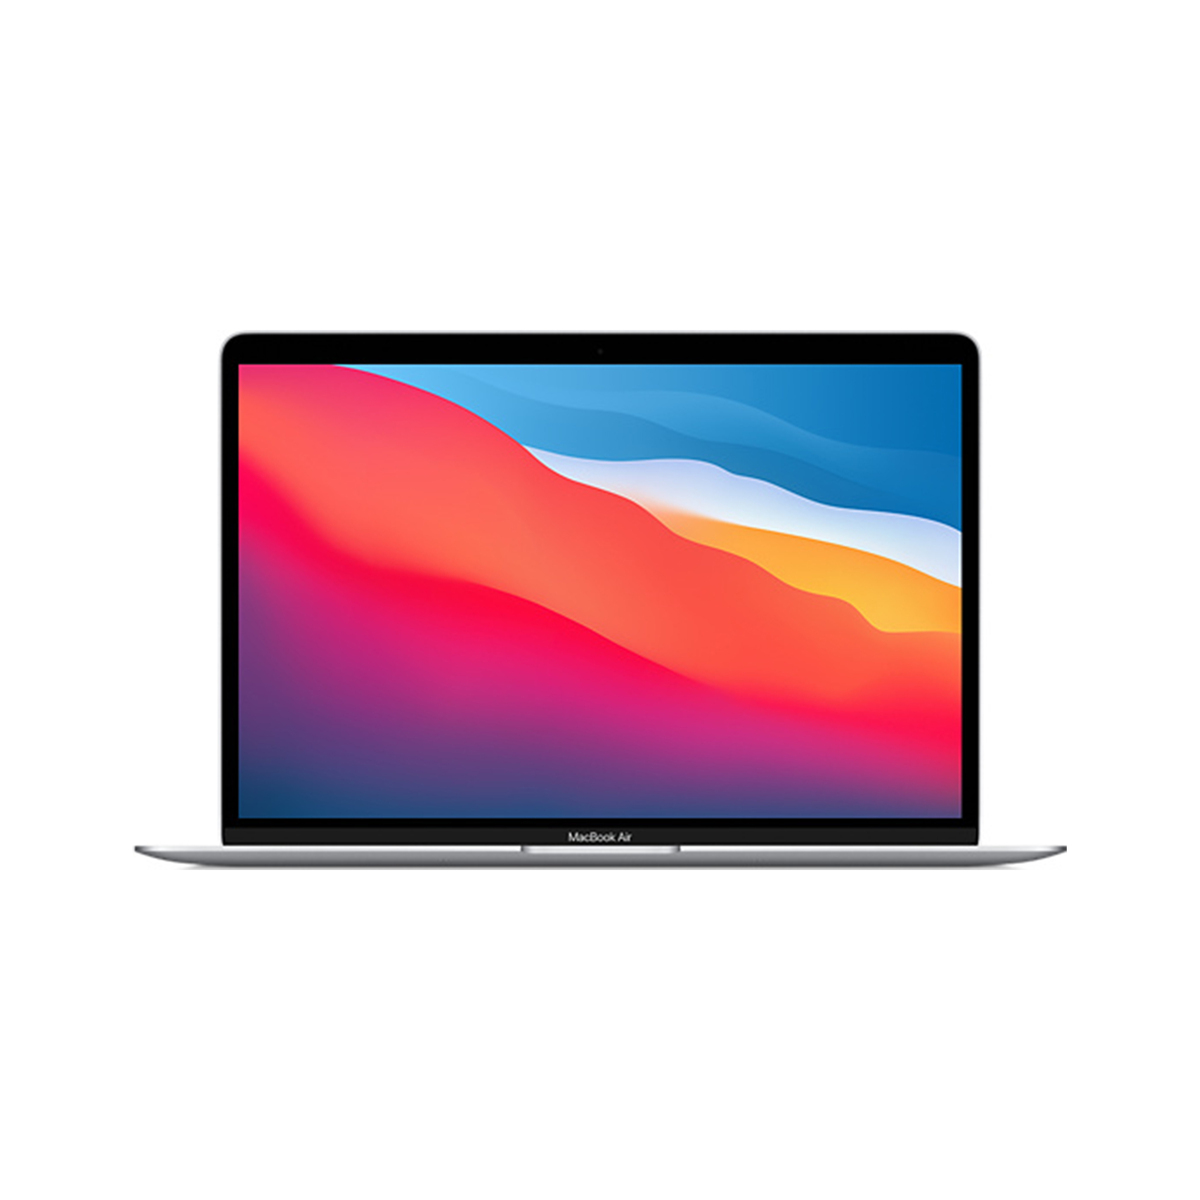 Apple MacBook Air 13"(MGN73AB/A), Apple M1 chip with 8-core CPU and 8-core GPU, 512GB - Space Grey